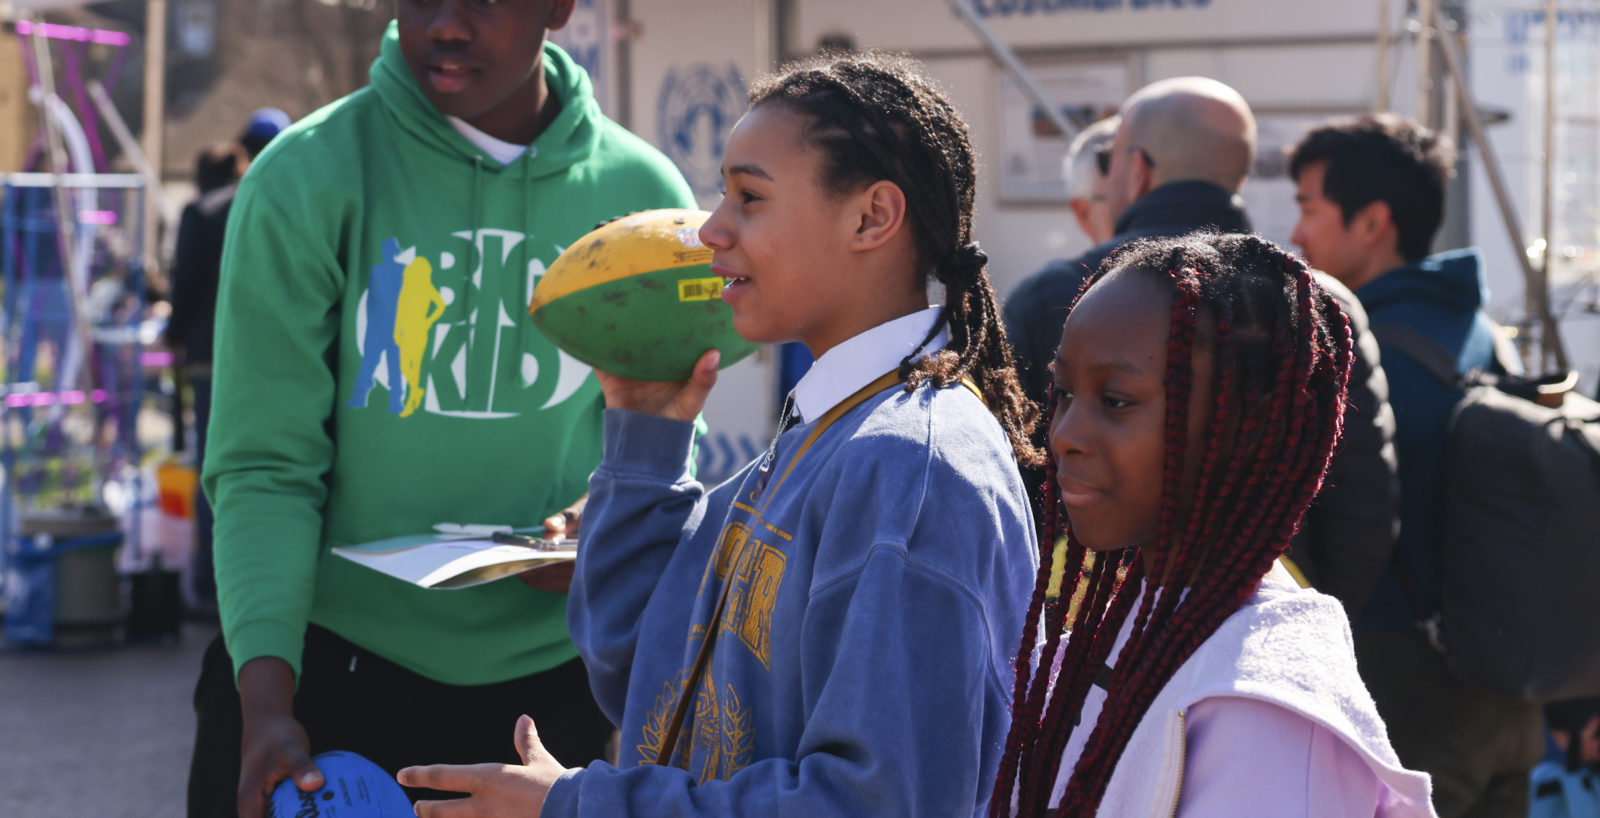 image of young people at the Child Friendly Lambeth event on Windrush Square